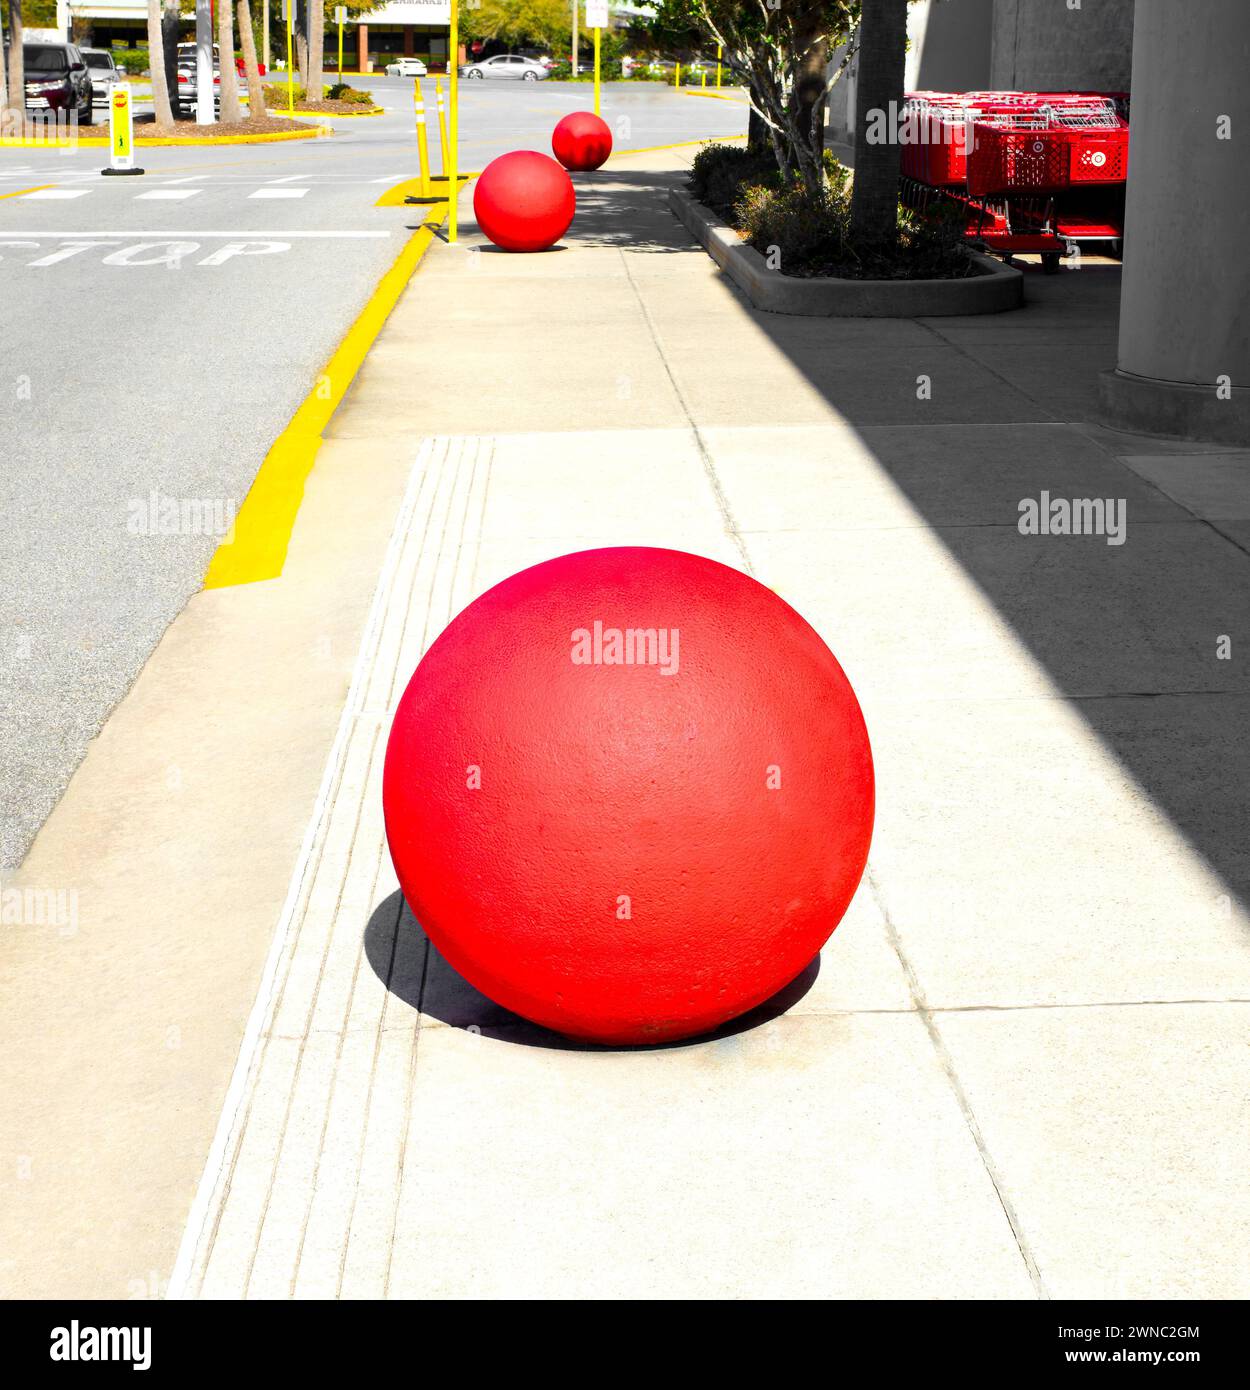 Ocala, Florida 2-27-2024 giant red concrete sphere, ball, bollard in front of the brick and mortar target retail store on sidewalk with cart or buggy Stock Photo